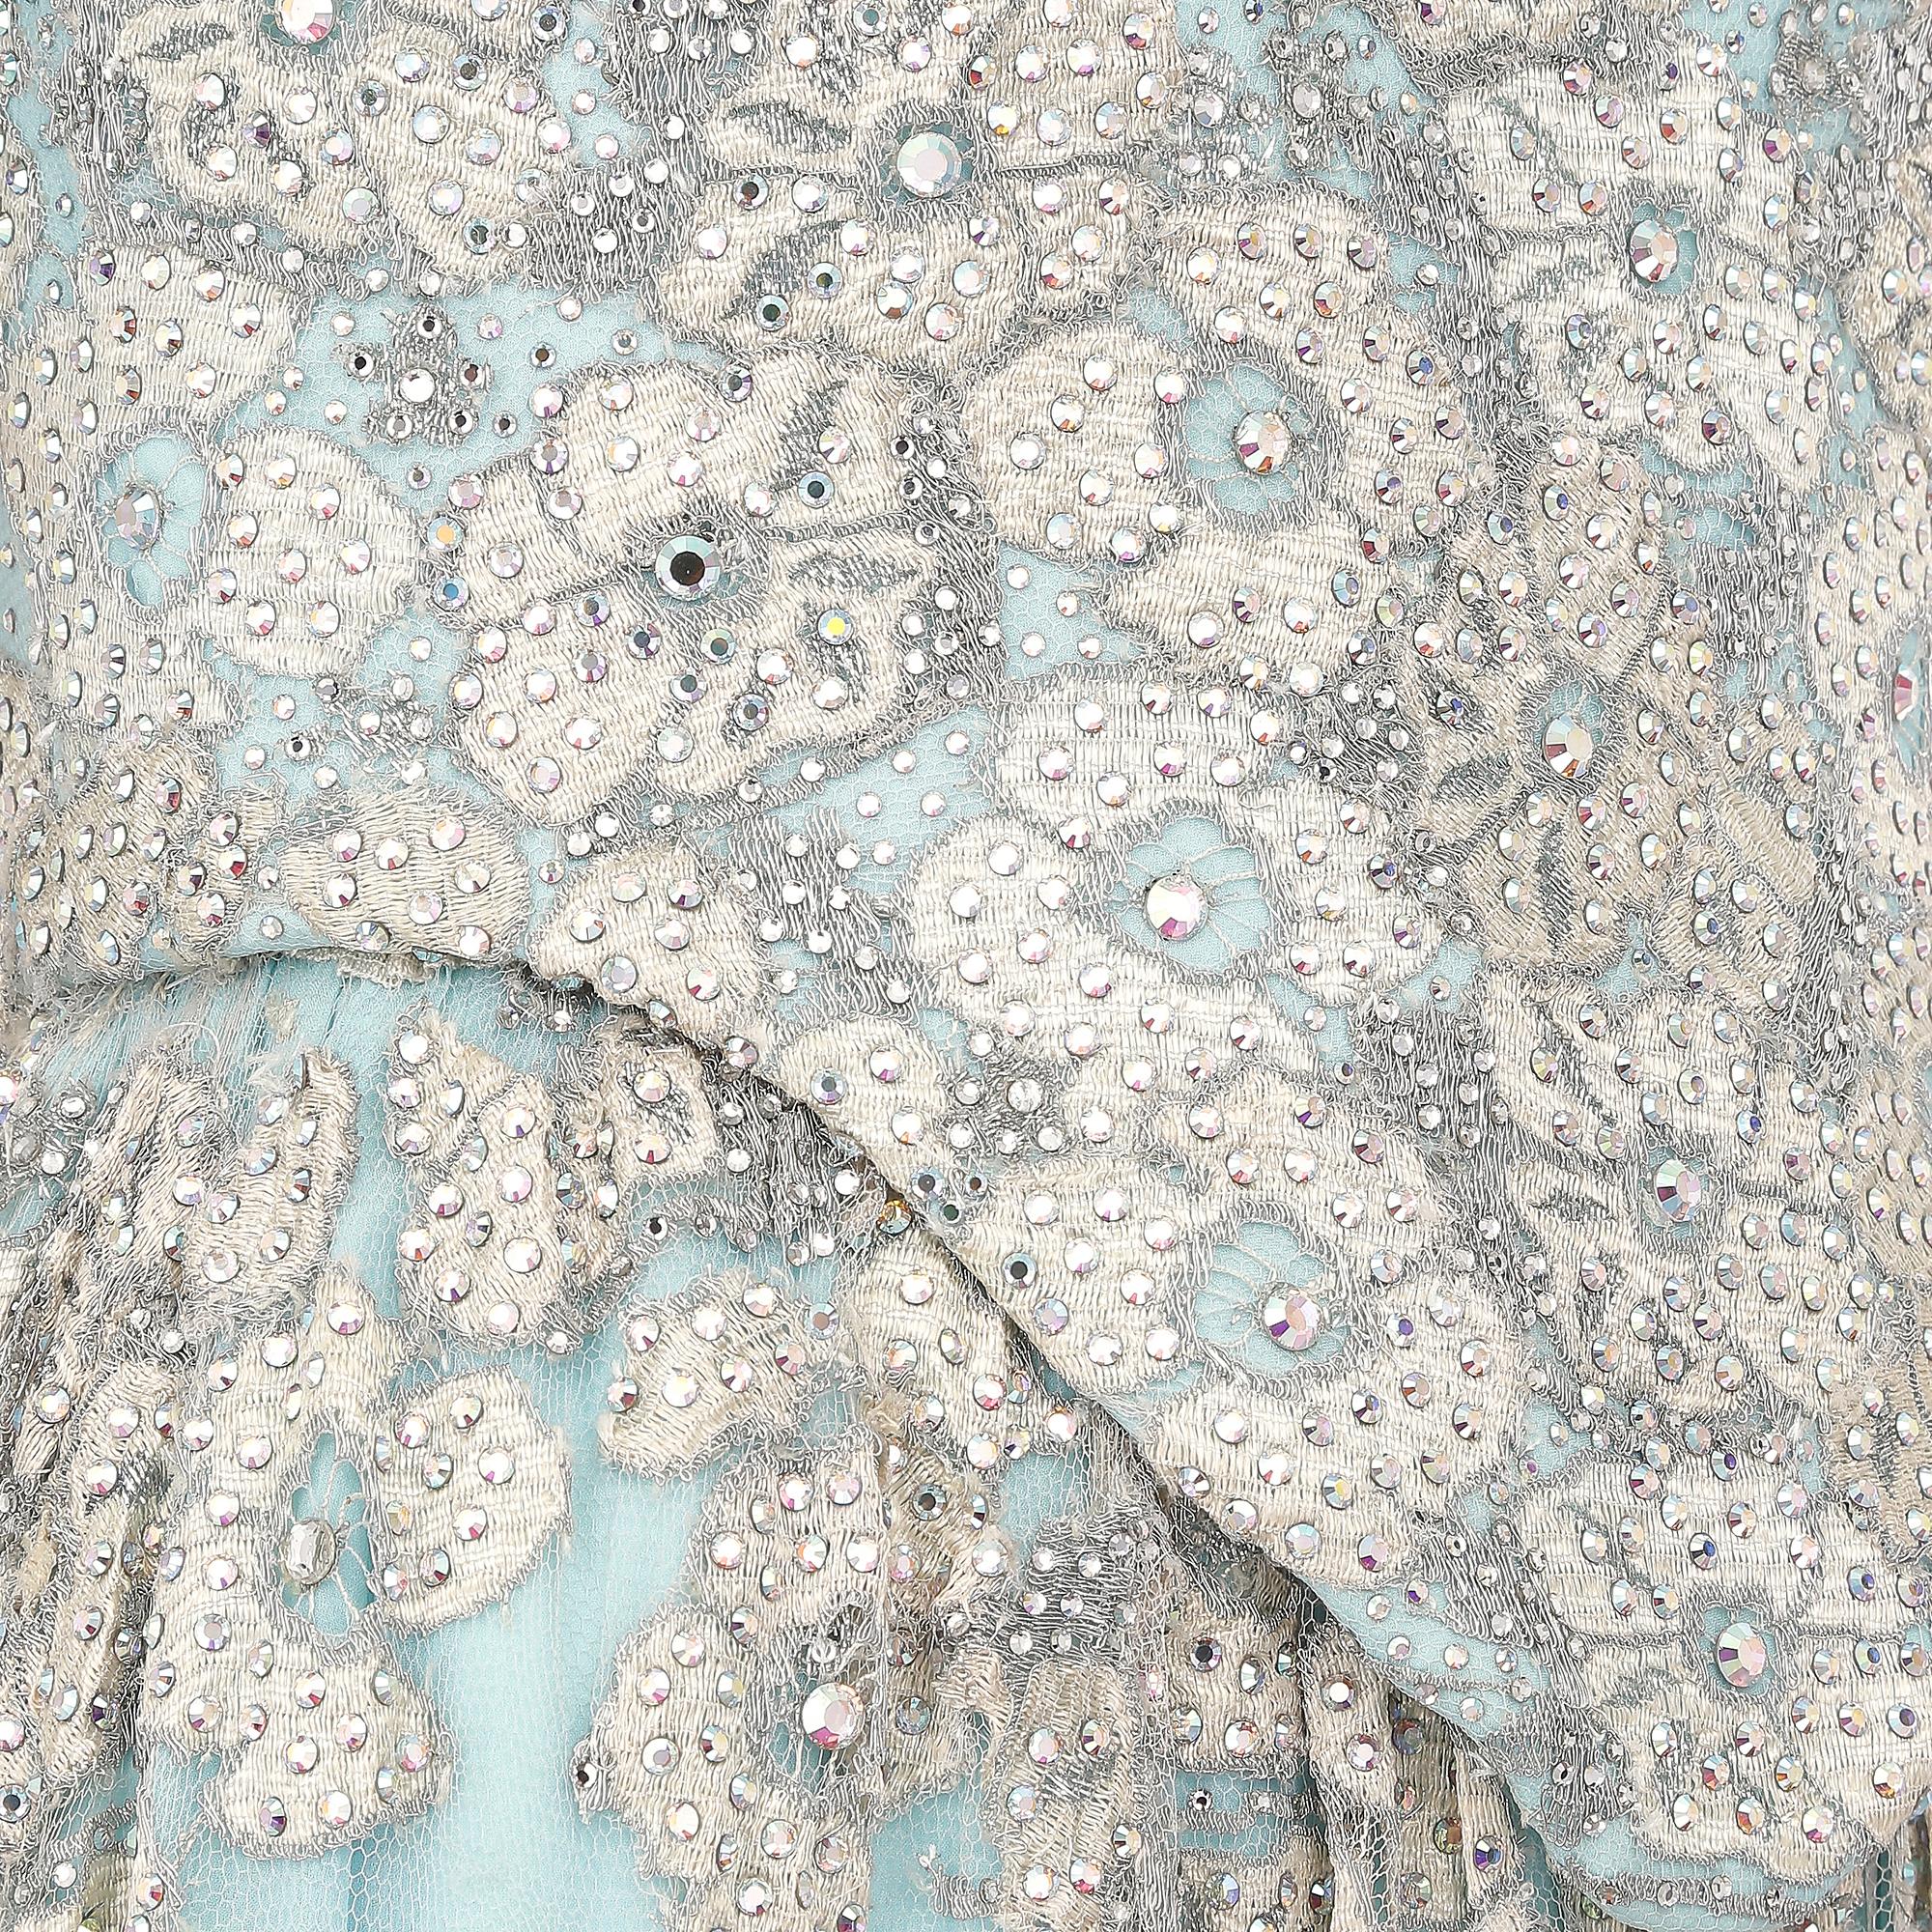 Women's 1990s Bespoke Embellished Lace and Crystal Turquoise Dress For Sale